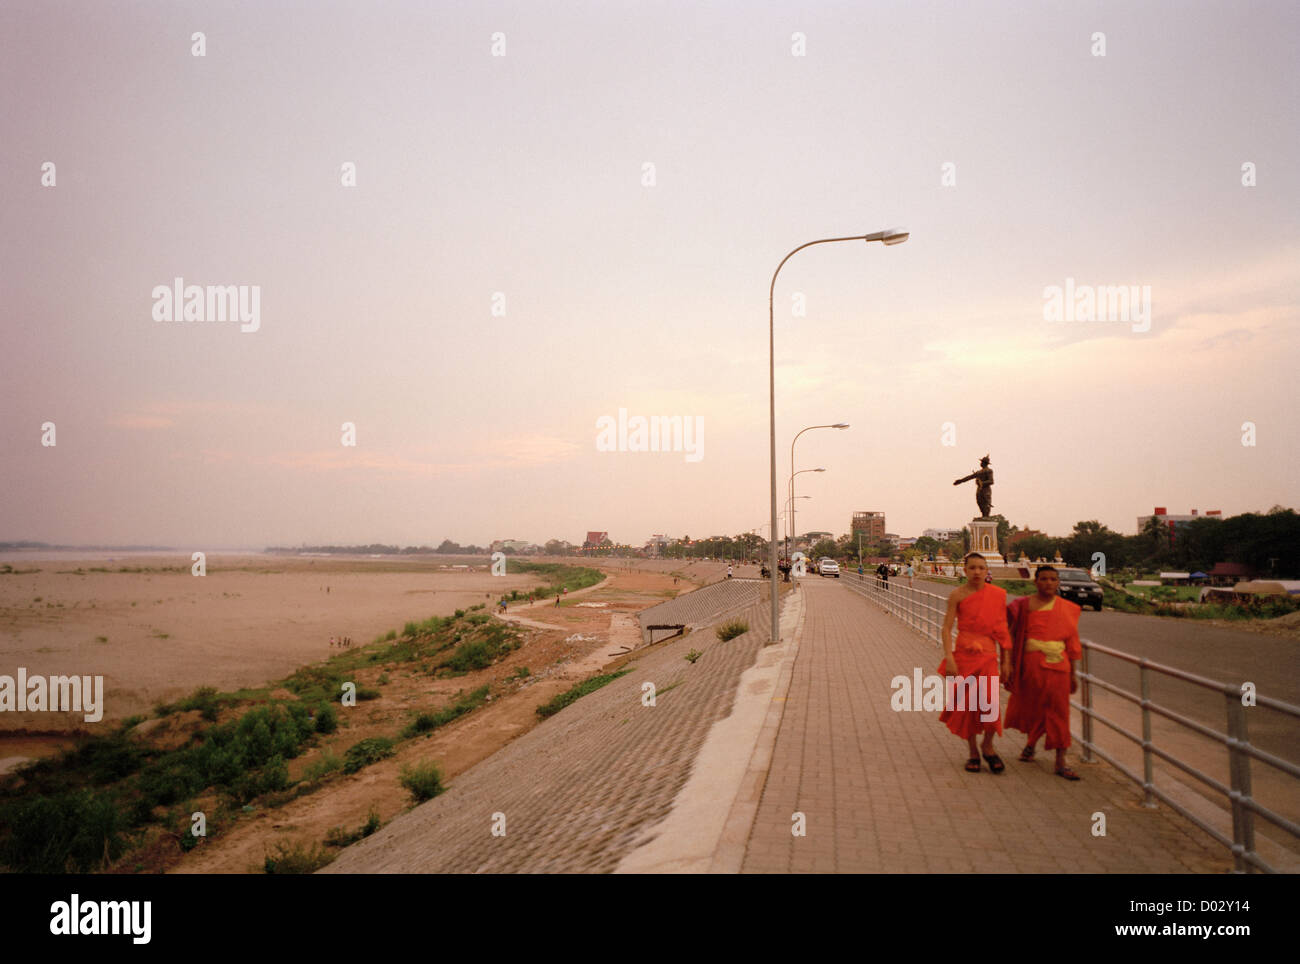 Two young Buddhist monks walk on the banks of the Mekong river in Vientiane in Laos in Indochina in Far East Southeast Asia. Religion People Buddhism Stock Photo